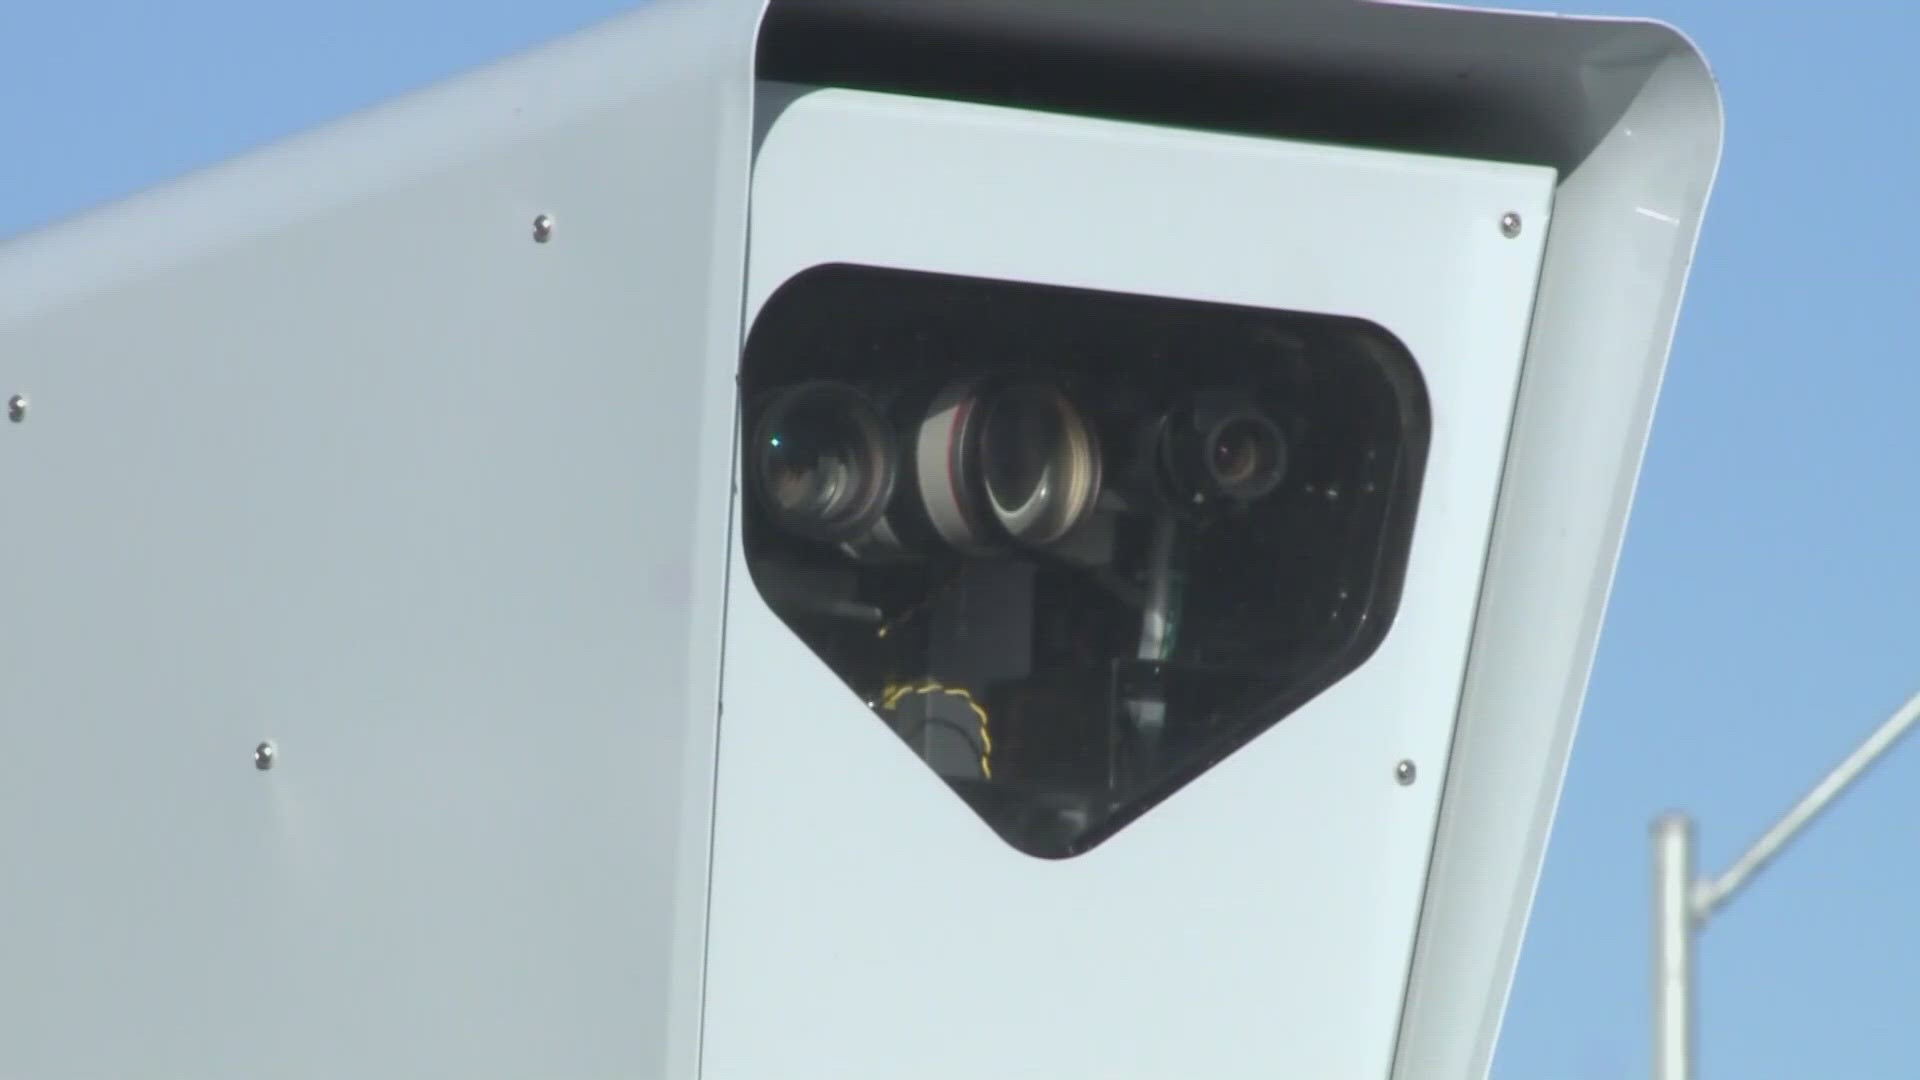 Senate Bill 1234 would have prohibited Arizona's police departments from utilizing cameras to enforce traffic laws.